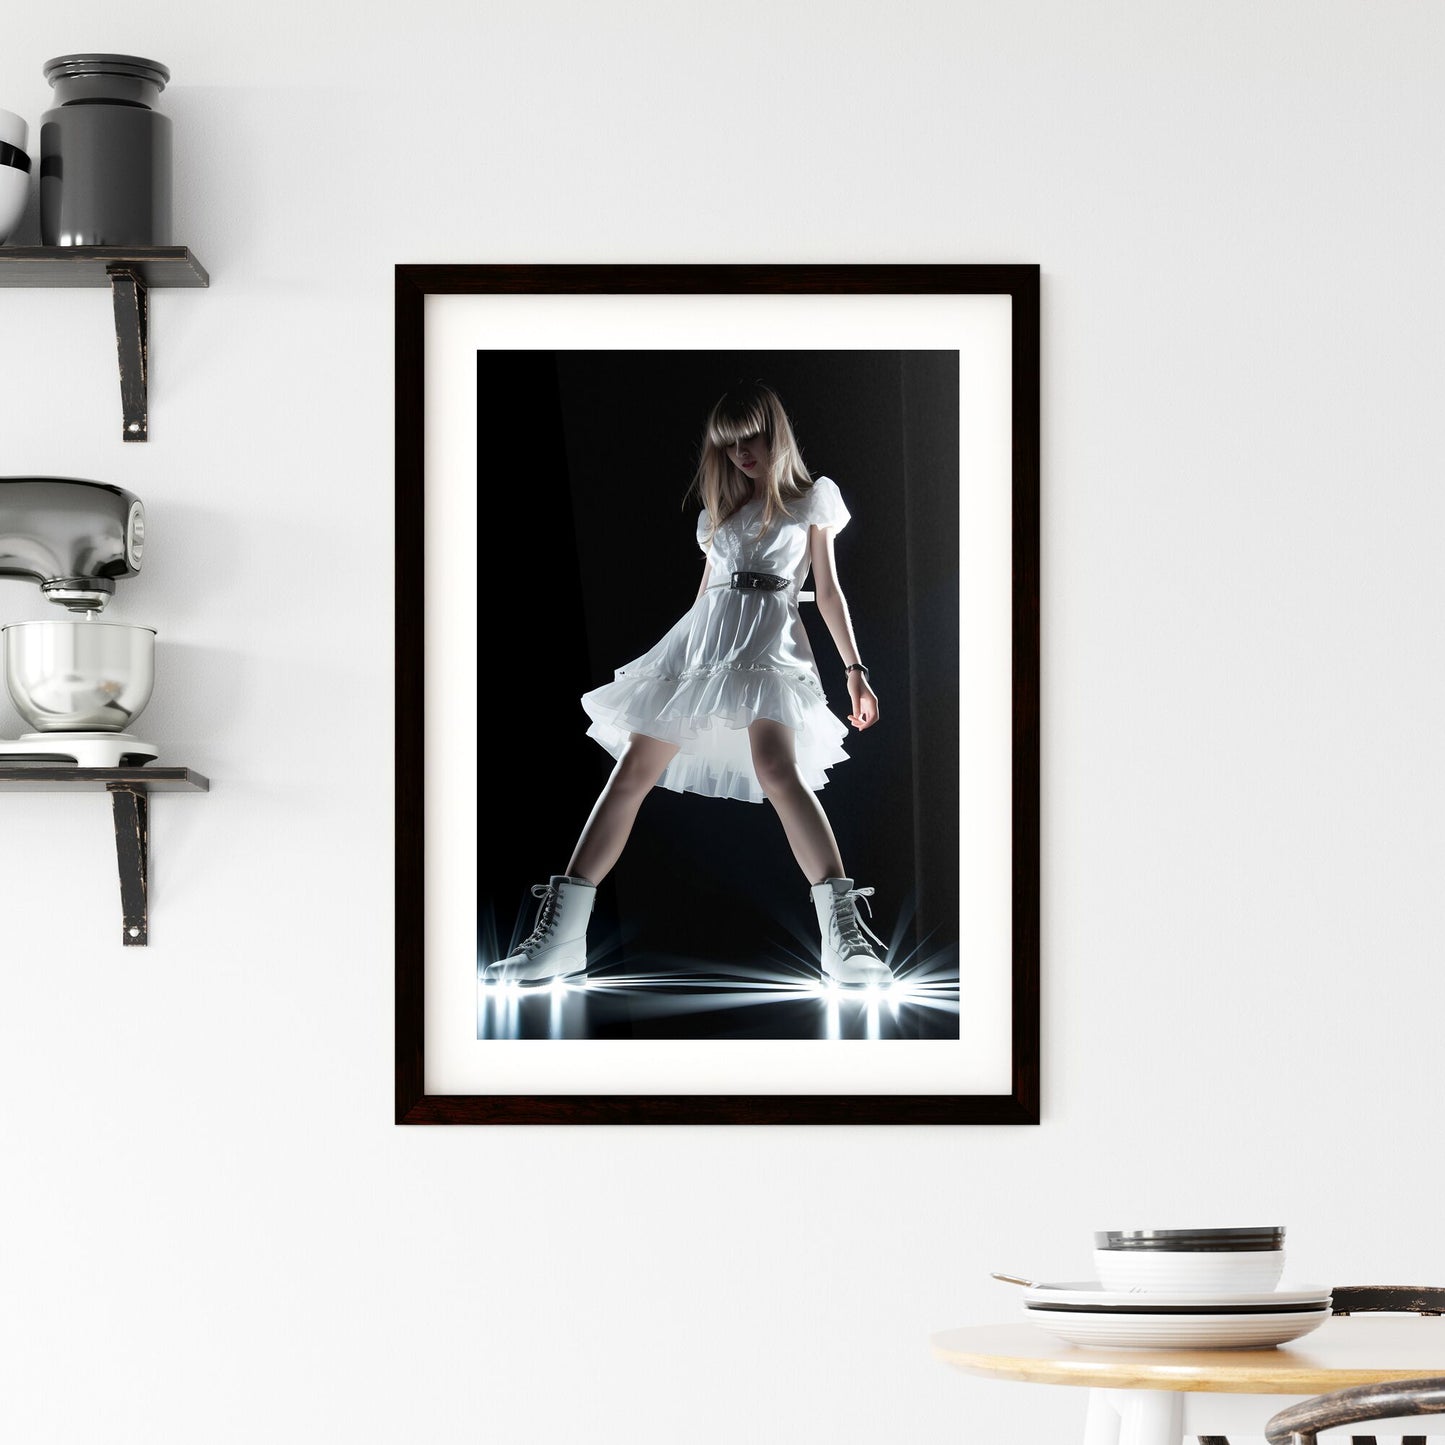 A Poster of very low angle - A Woman In A White Dress And White Boots Default Title